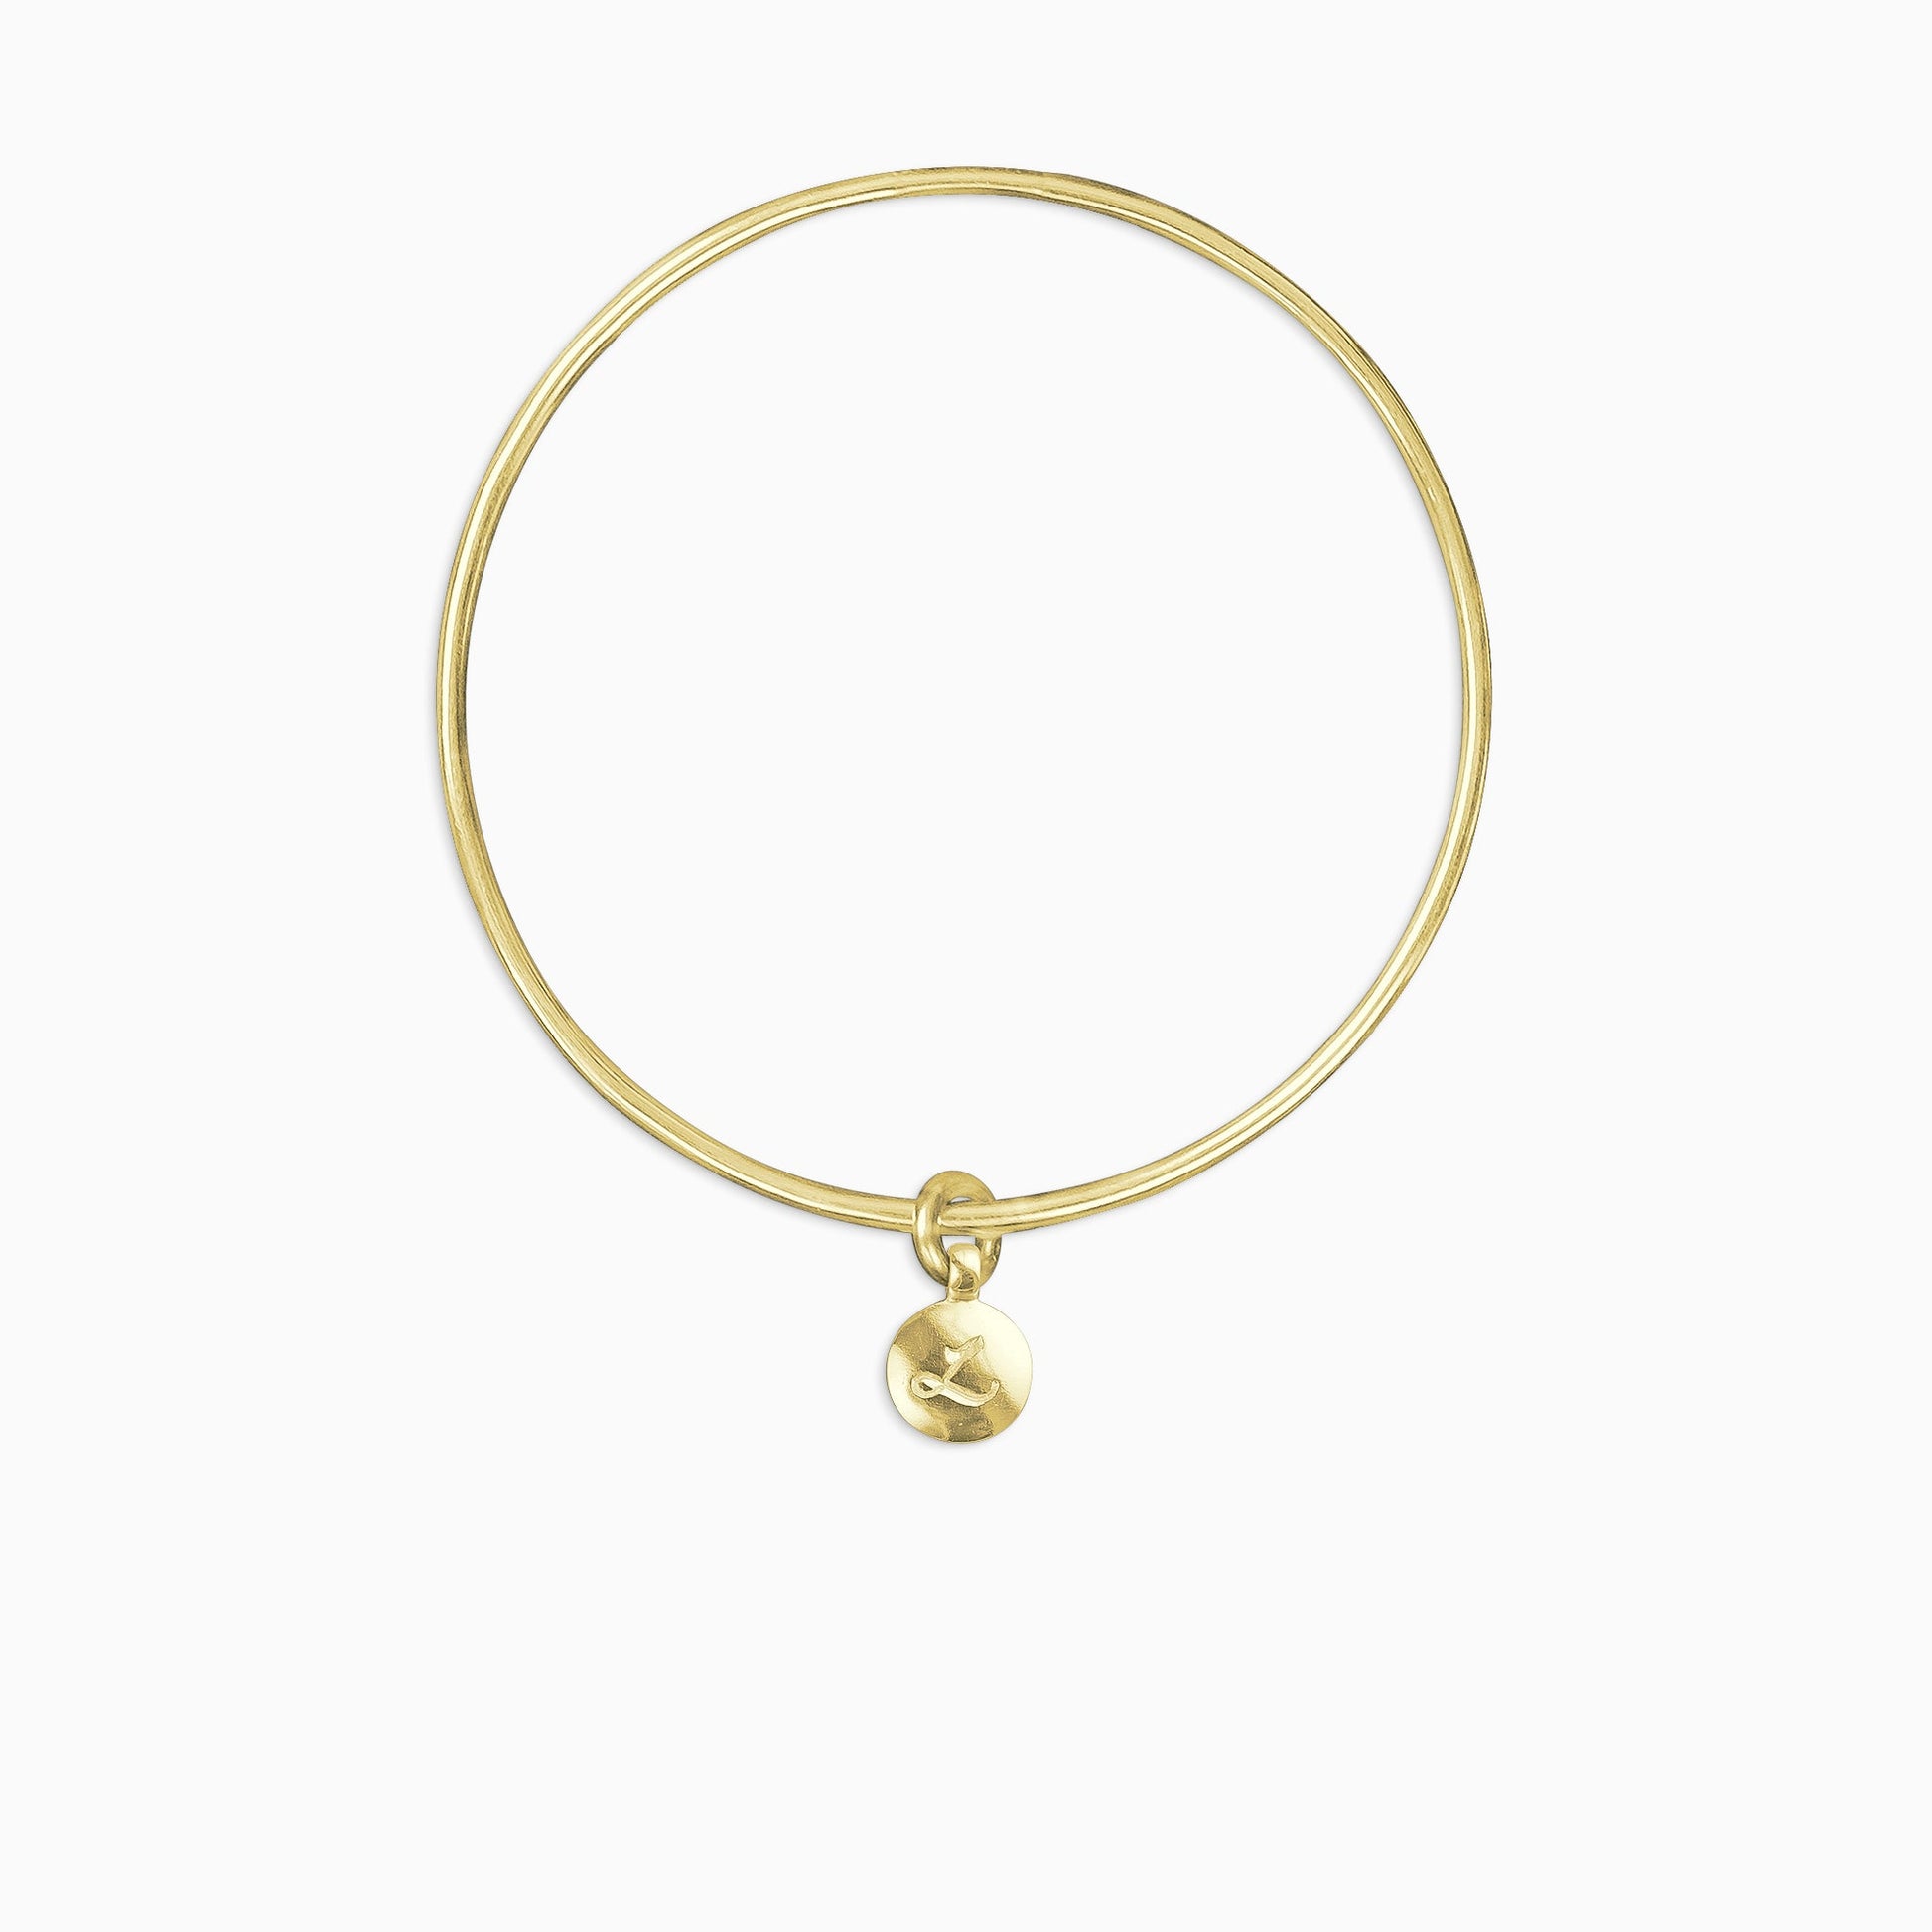 An 18ct Fairtrade yellow gold round, smooth charm engraved with a single letter, choose from A-Z, freely moving on a round wire bangle. Charm 13mm diameter. Bangle 63mm inside diameter x 2mm round wire.